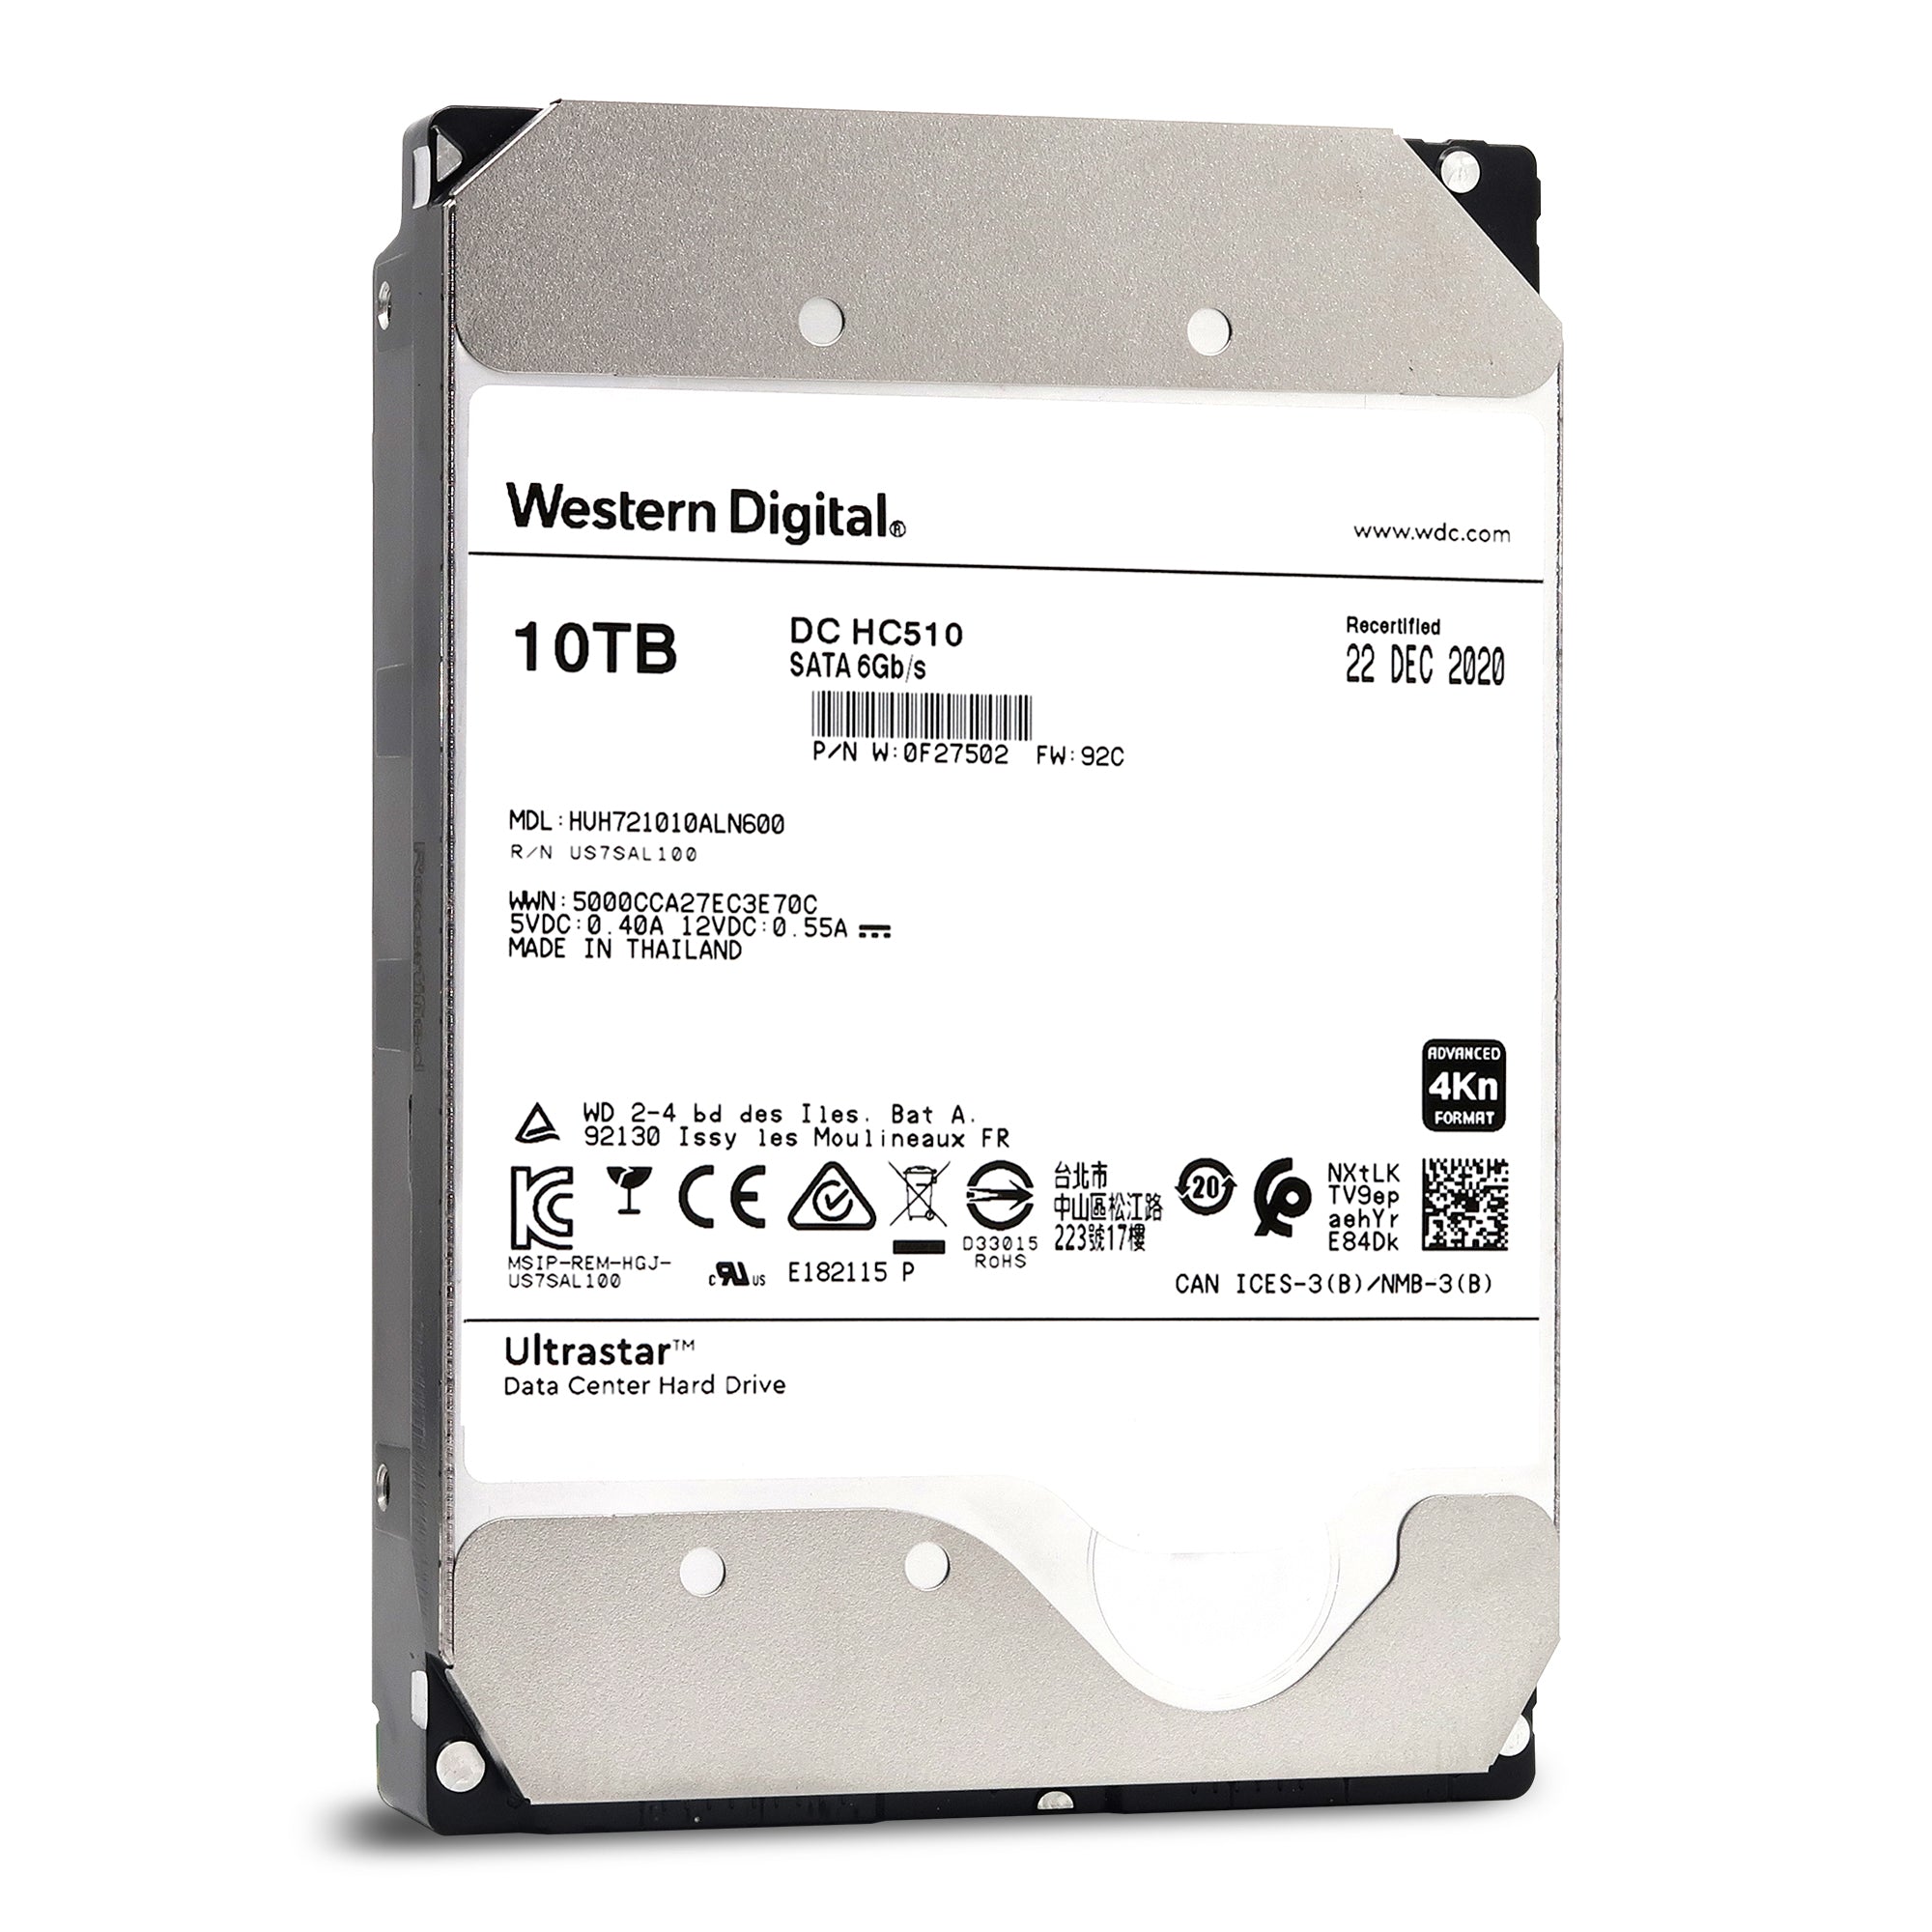 Western Digital DC HC510 HUH721010ALN600 0F27502 10TB 7.2K RPM SATA 6Gb/s 4Kn 256MB 3.5" ISE Power Disable Pin Manufacturer Recertified HDD - Front View